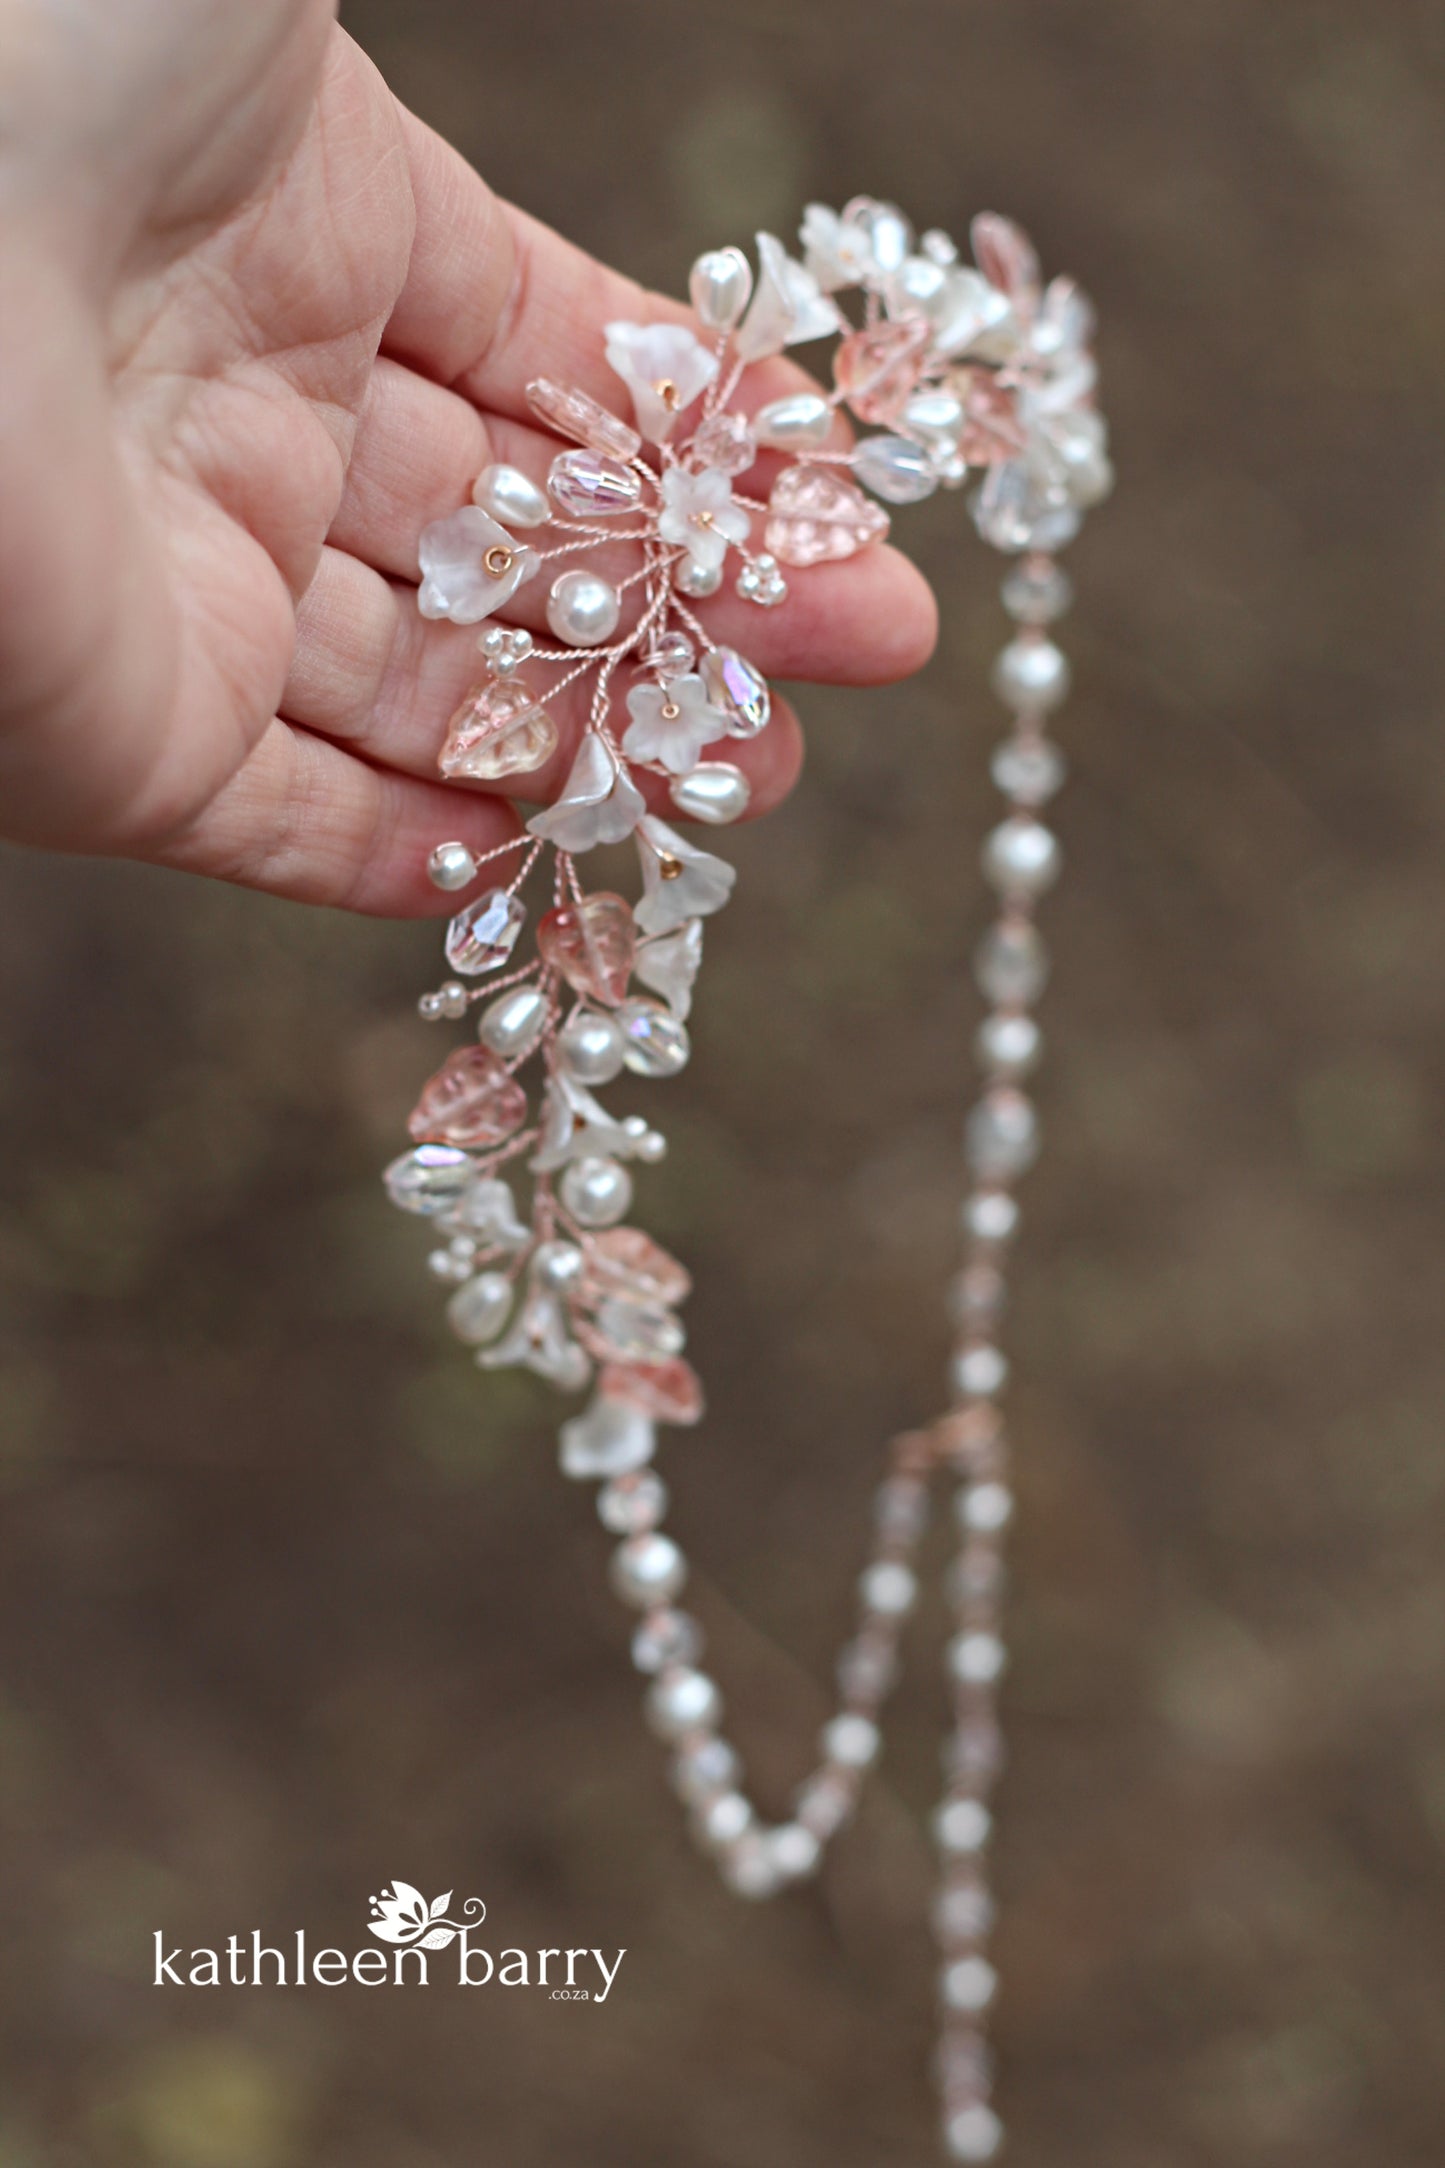 Shelby floral necklace - Flowers, leaves, crystals and pearls in rose gold, gold or silver finish